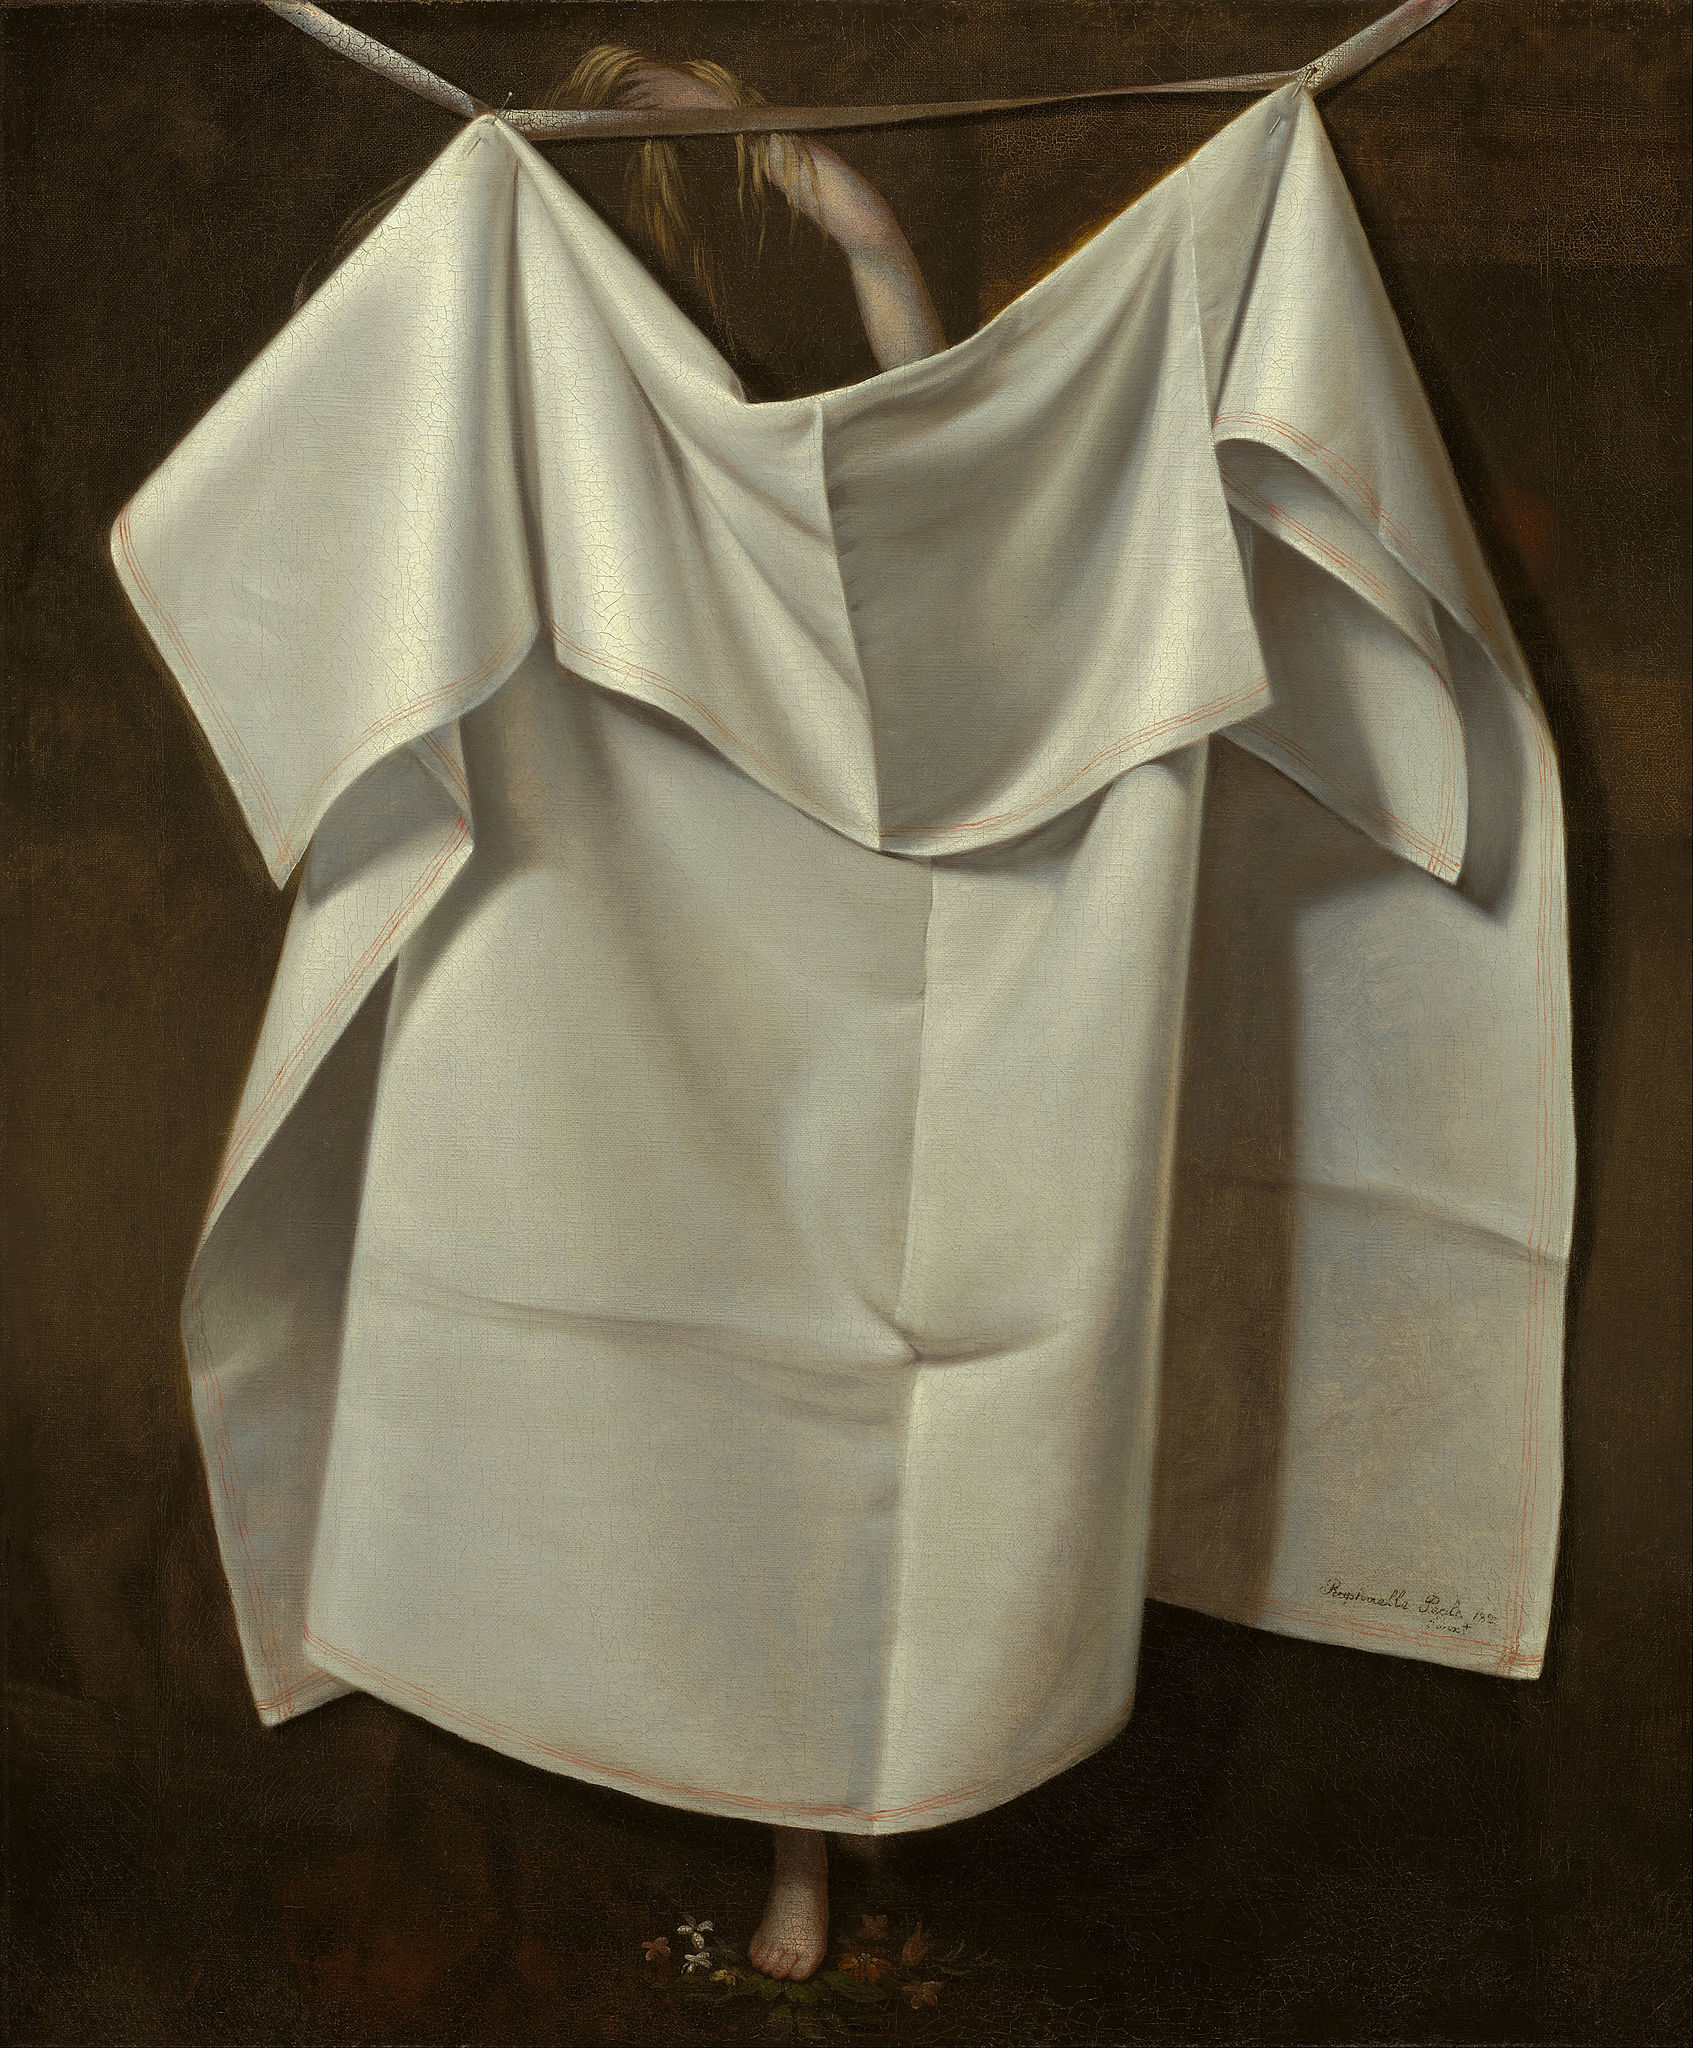 Venus Rising From The Sea - A Deception by Raphaelle Peale - c. 1822 - 73.98 x 61.28 cm Nelson-Atkins Museum of Art